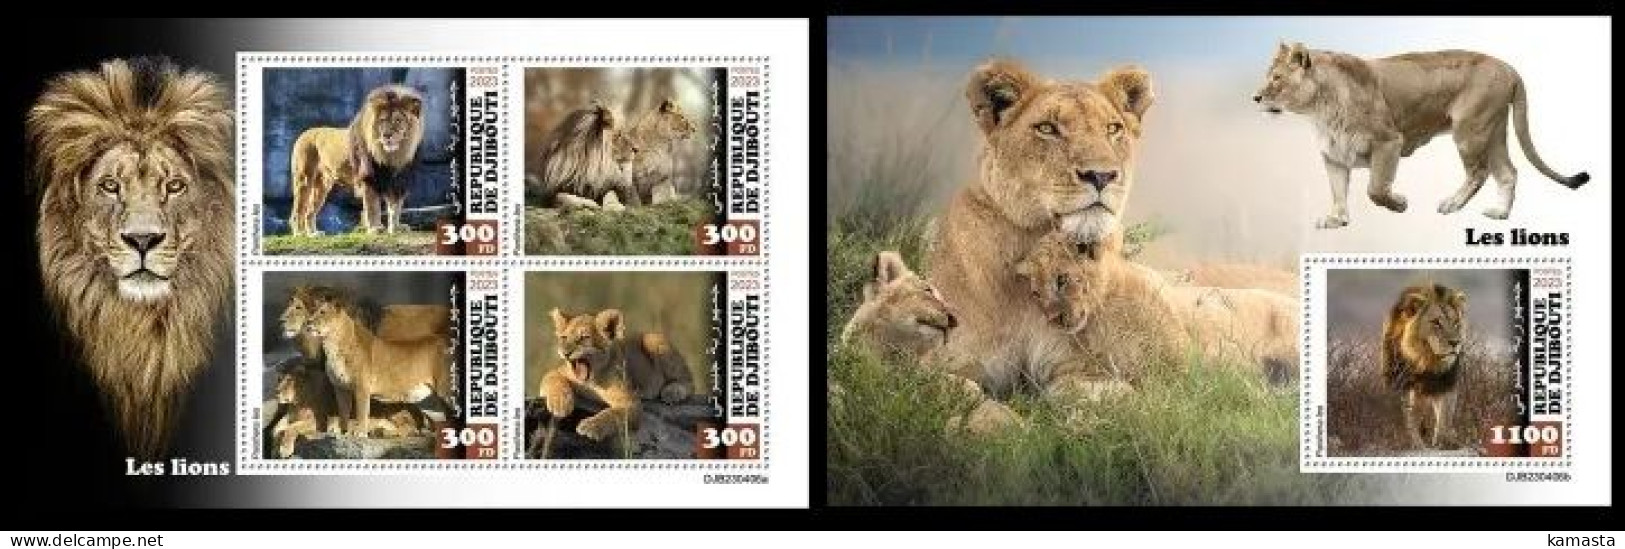 Djibouti 2023 Lions. (406) OFFICIAL ISSUE - Big Cats (cats Of Prey)